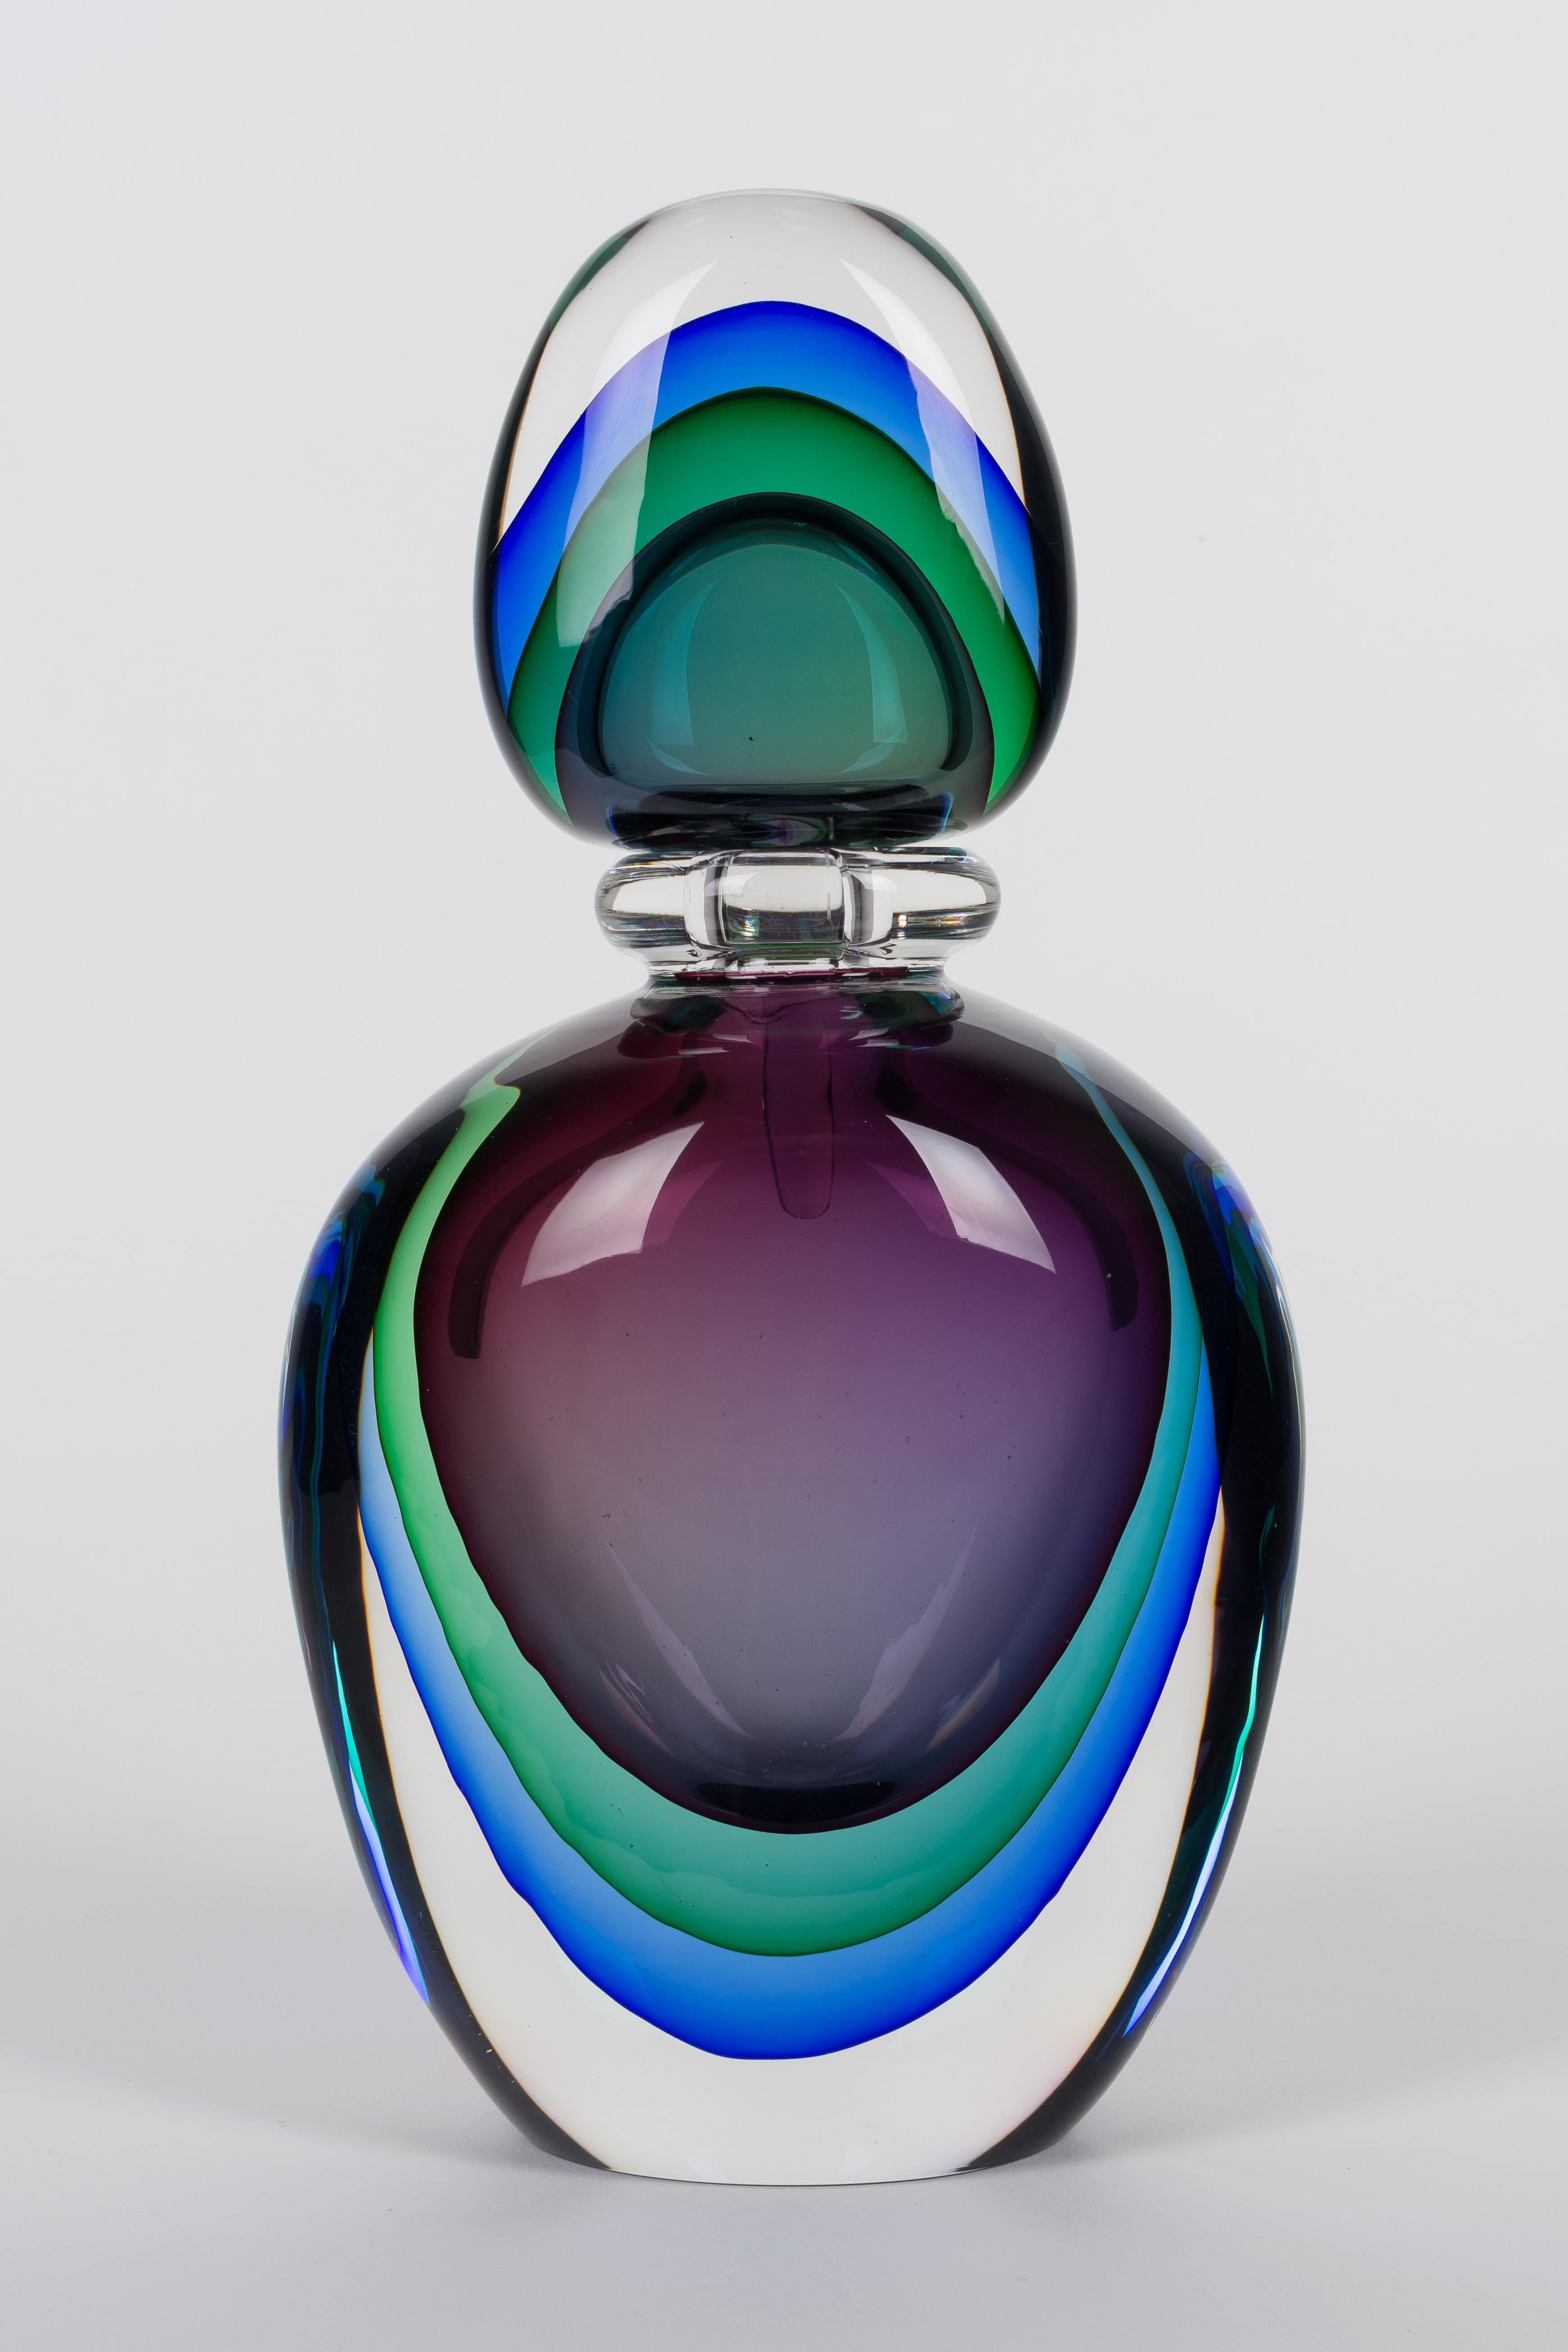 Hand-Crafted Flavio Poli Murano Glass Sommerso Bottle